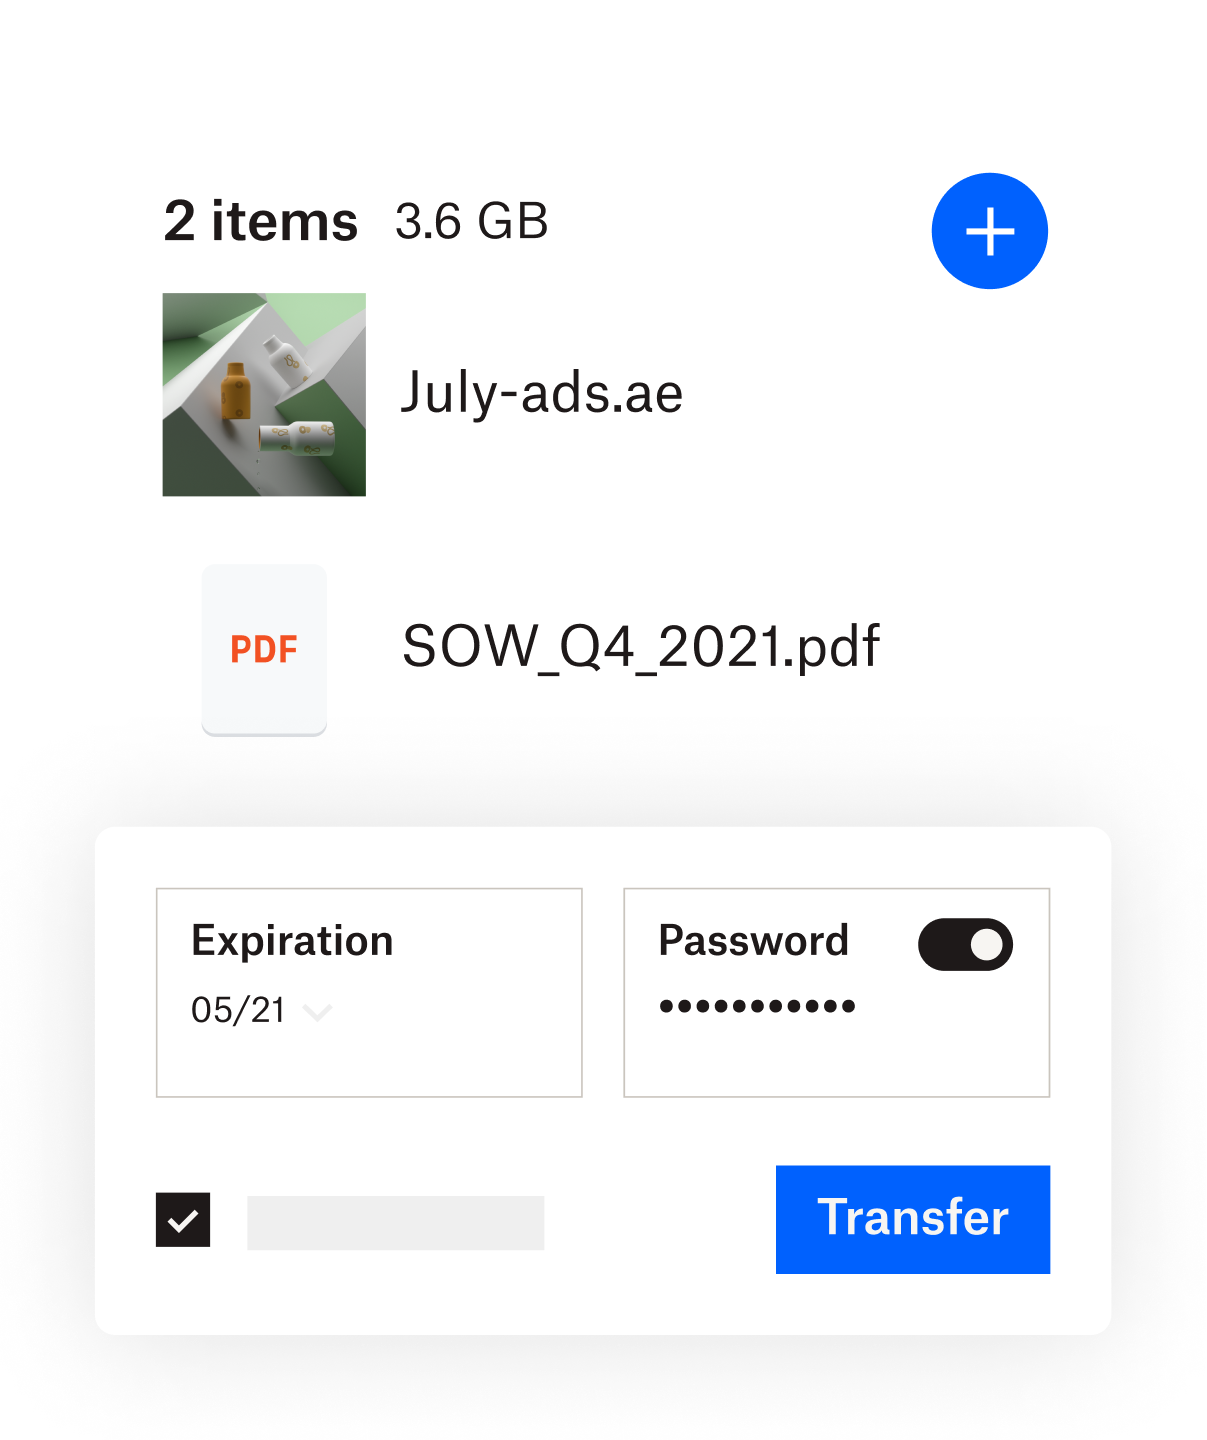 The Dropbox interface where an expiration date and password can be added to a file